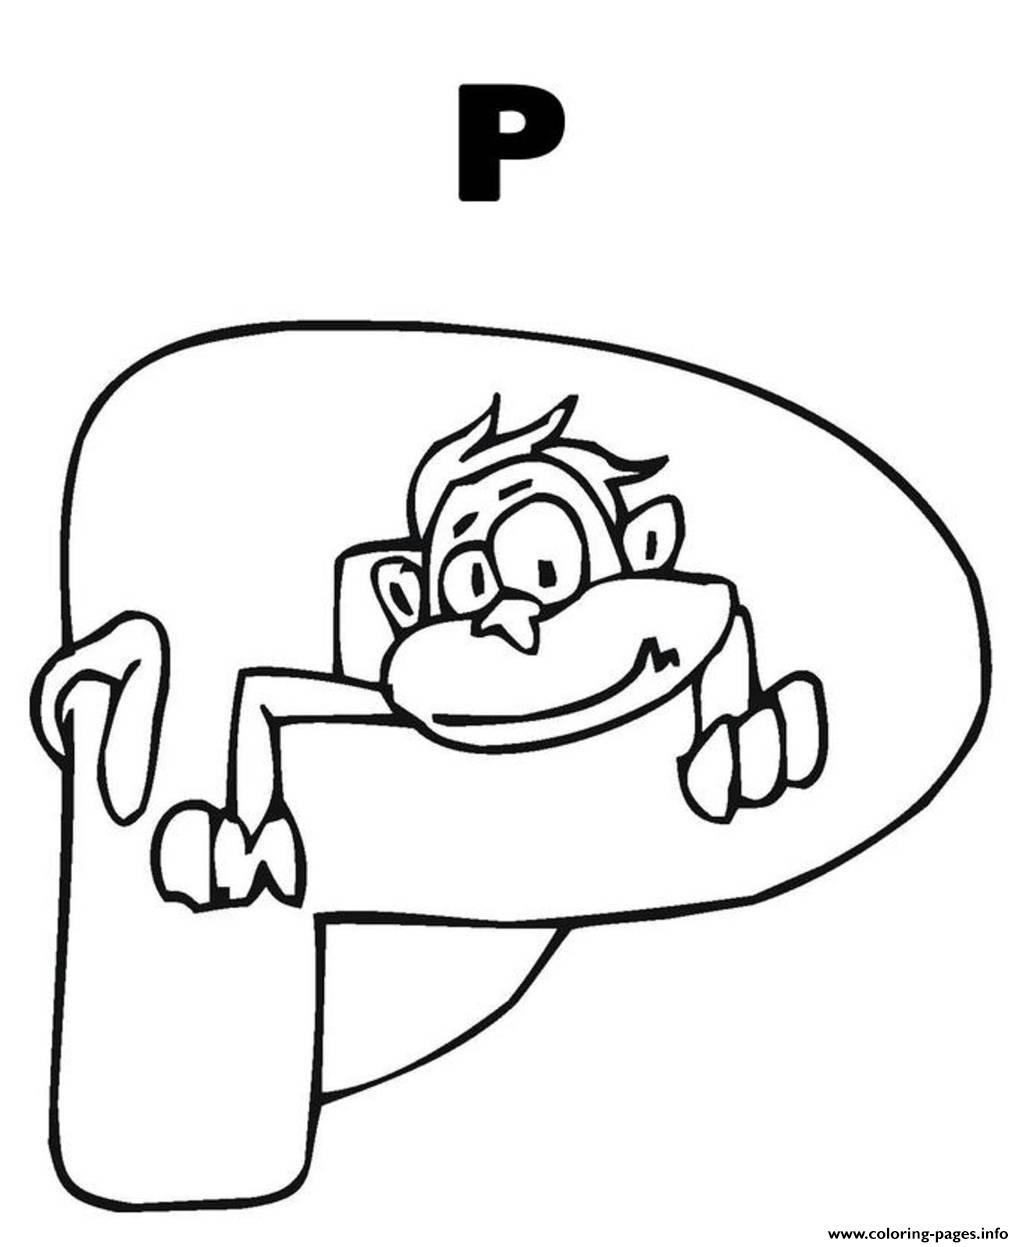 p pictures coloring pages - photo #12